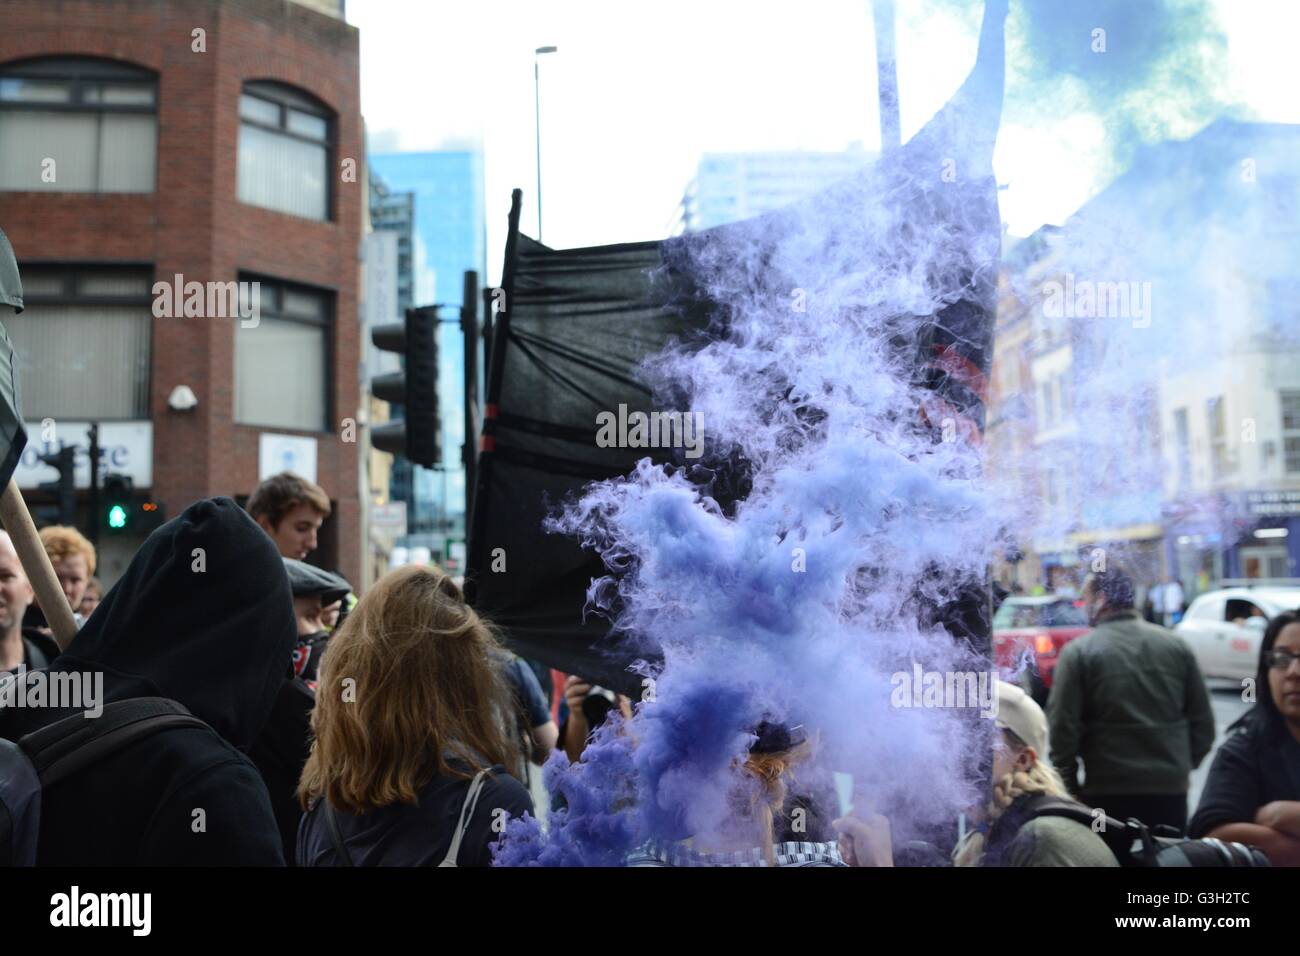 London, UK. 24 June, 2016. Pro-europe and migrant rally held in London.  Smoke rises from a smoke grenade, one of many to be let off during the march. Credit:  Marc Ward/Alamy Live News Stock Photo